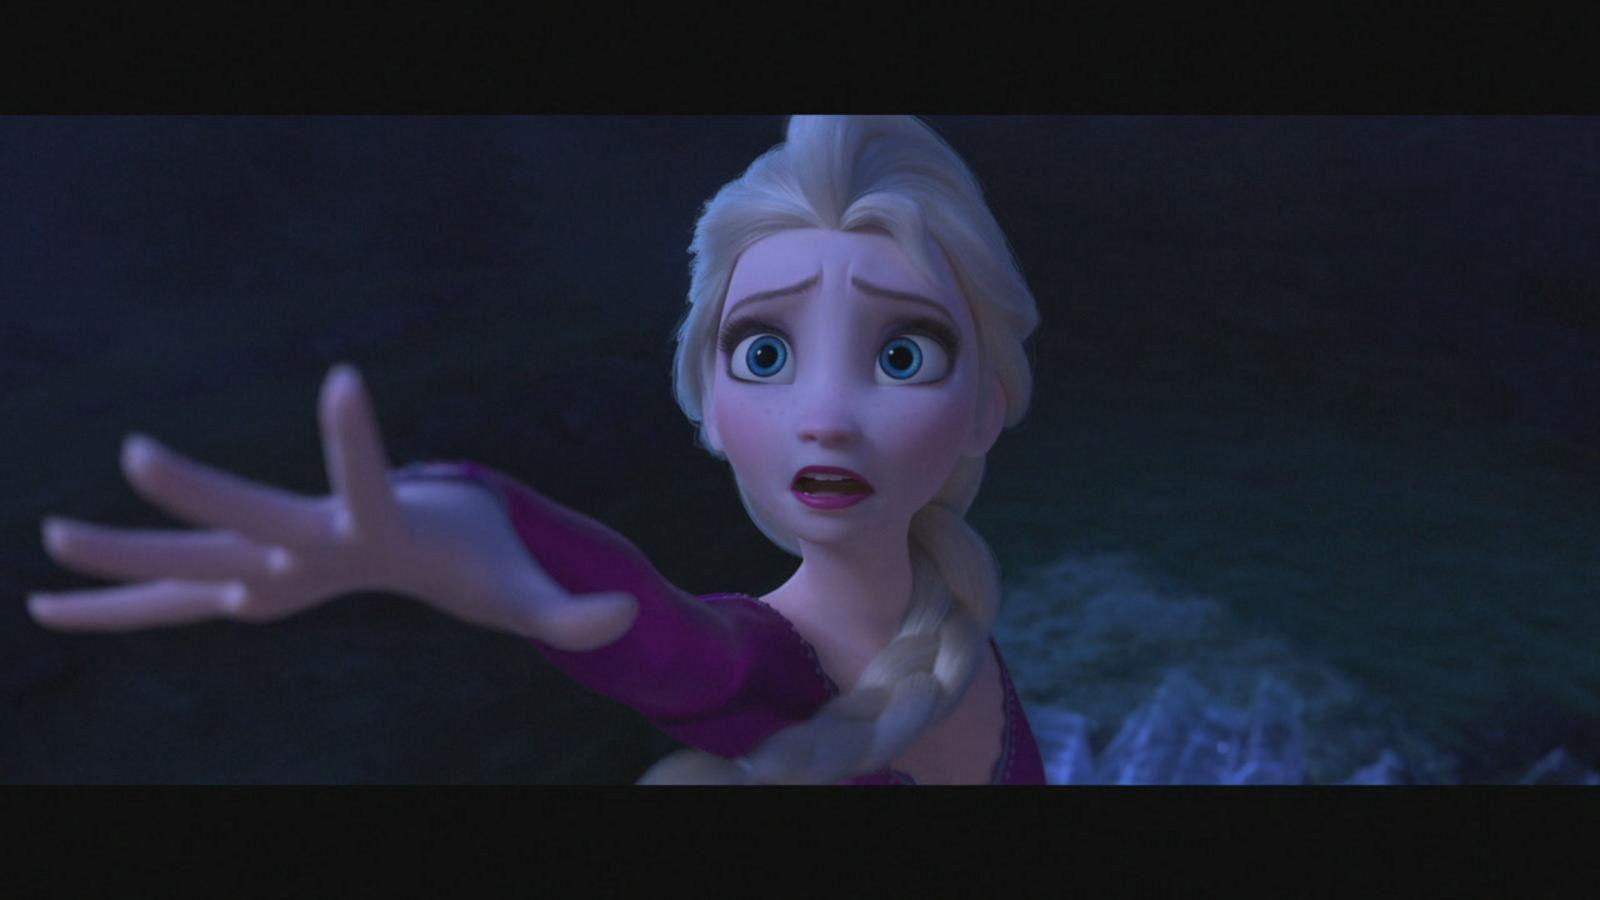 Exclusive 1st look at 'Frozen 2' trailer: Elsa must find out